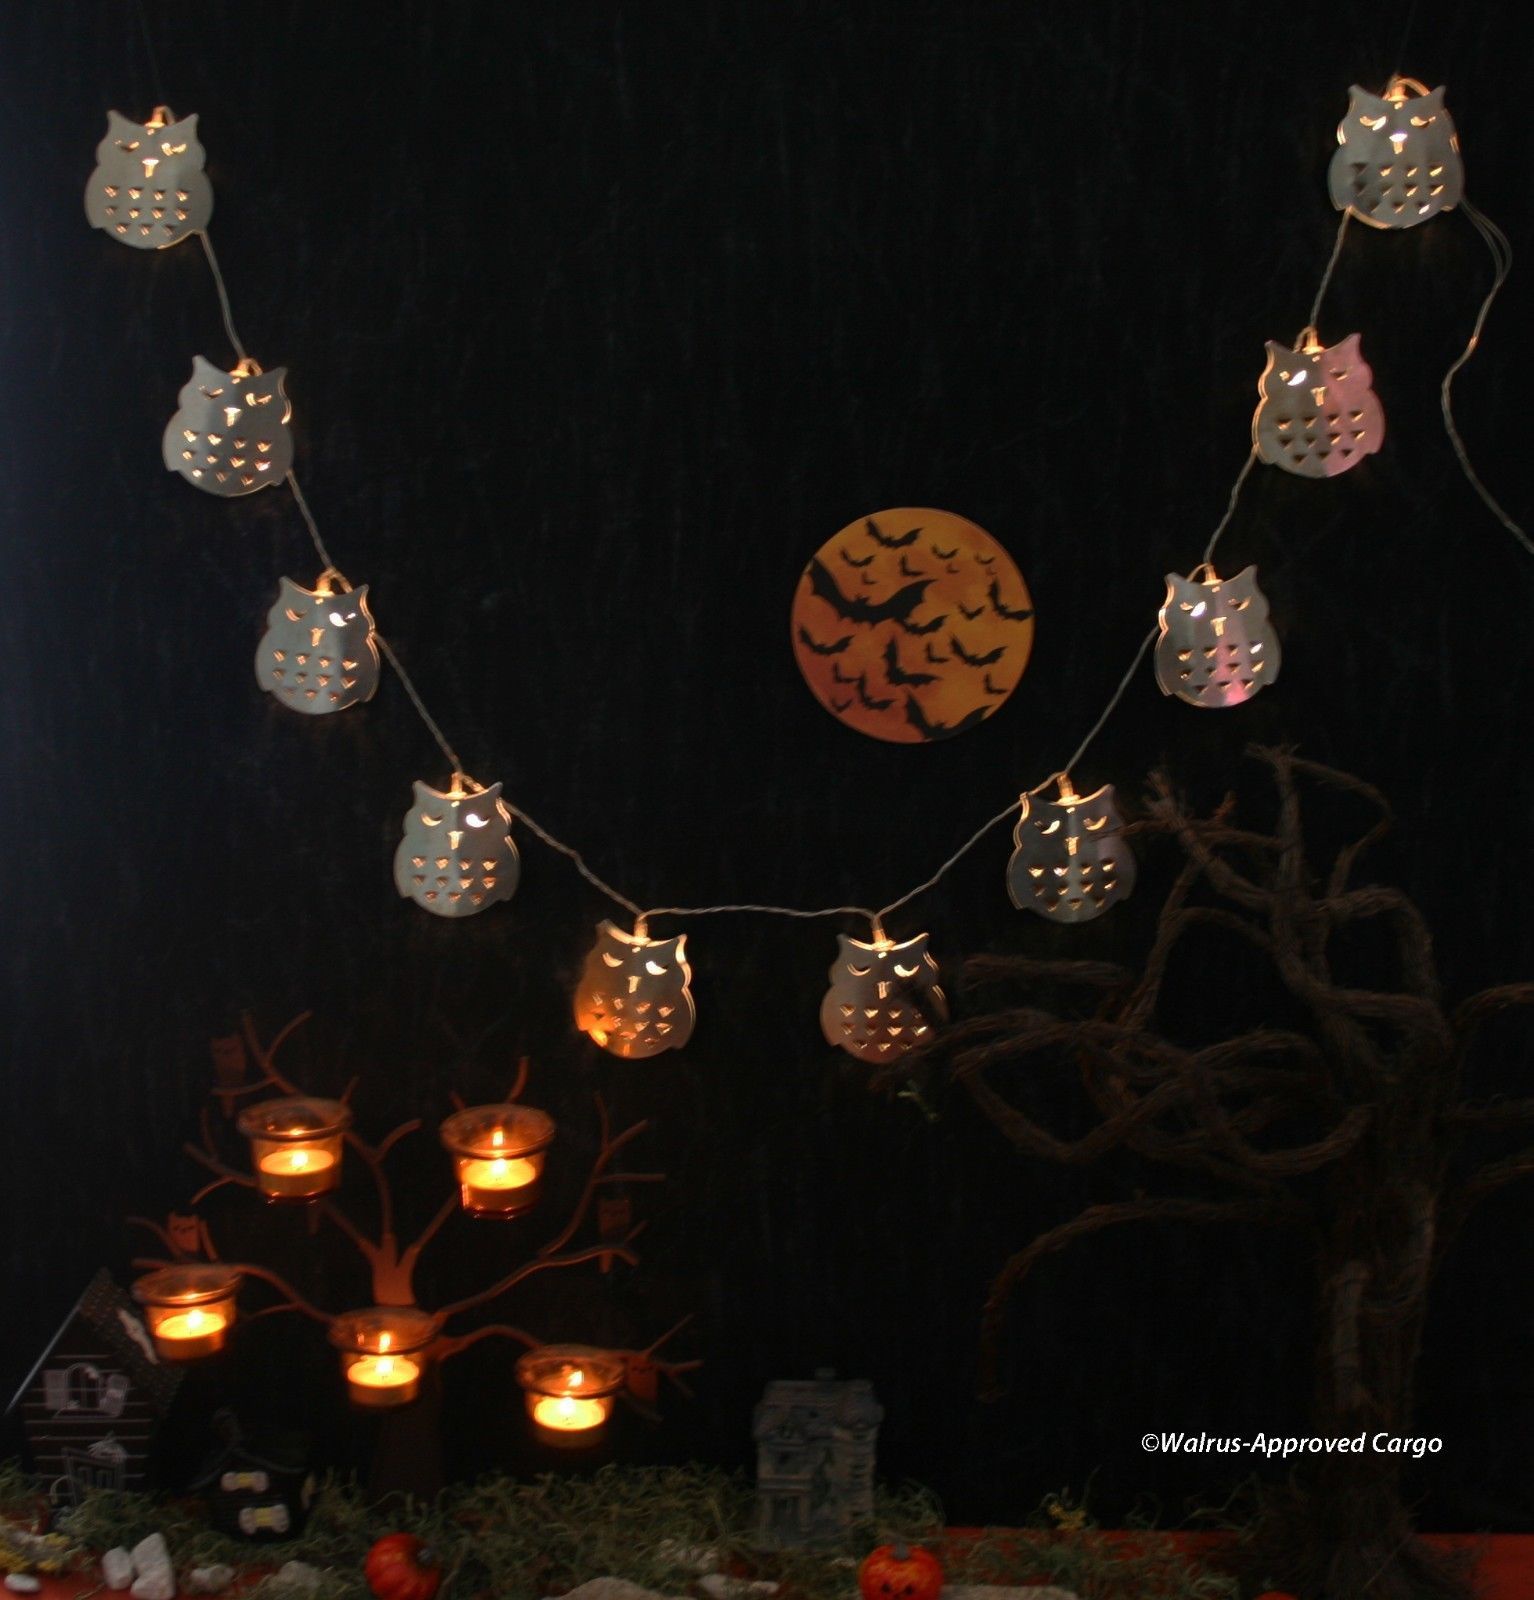 POTTERY BARN GALVANIZED OWL STRING LIGHTS -NIB- GIVE A HOOT ABOUT FUN FALL DÉCOR - $49.95